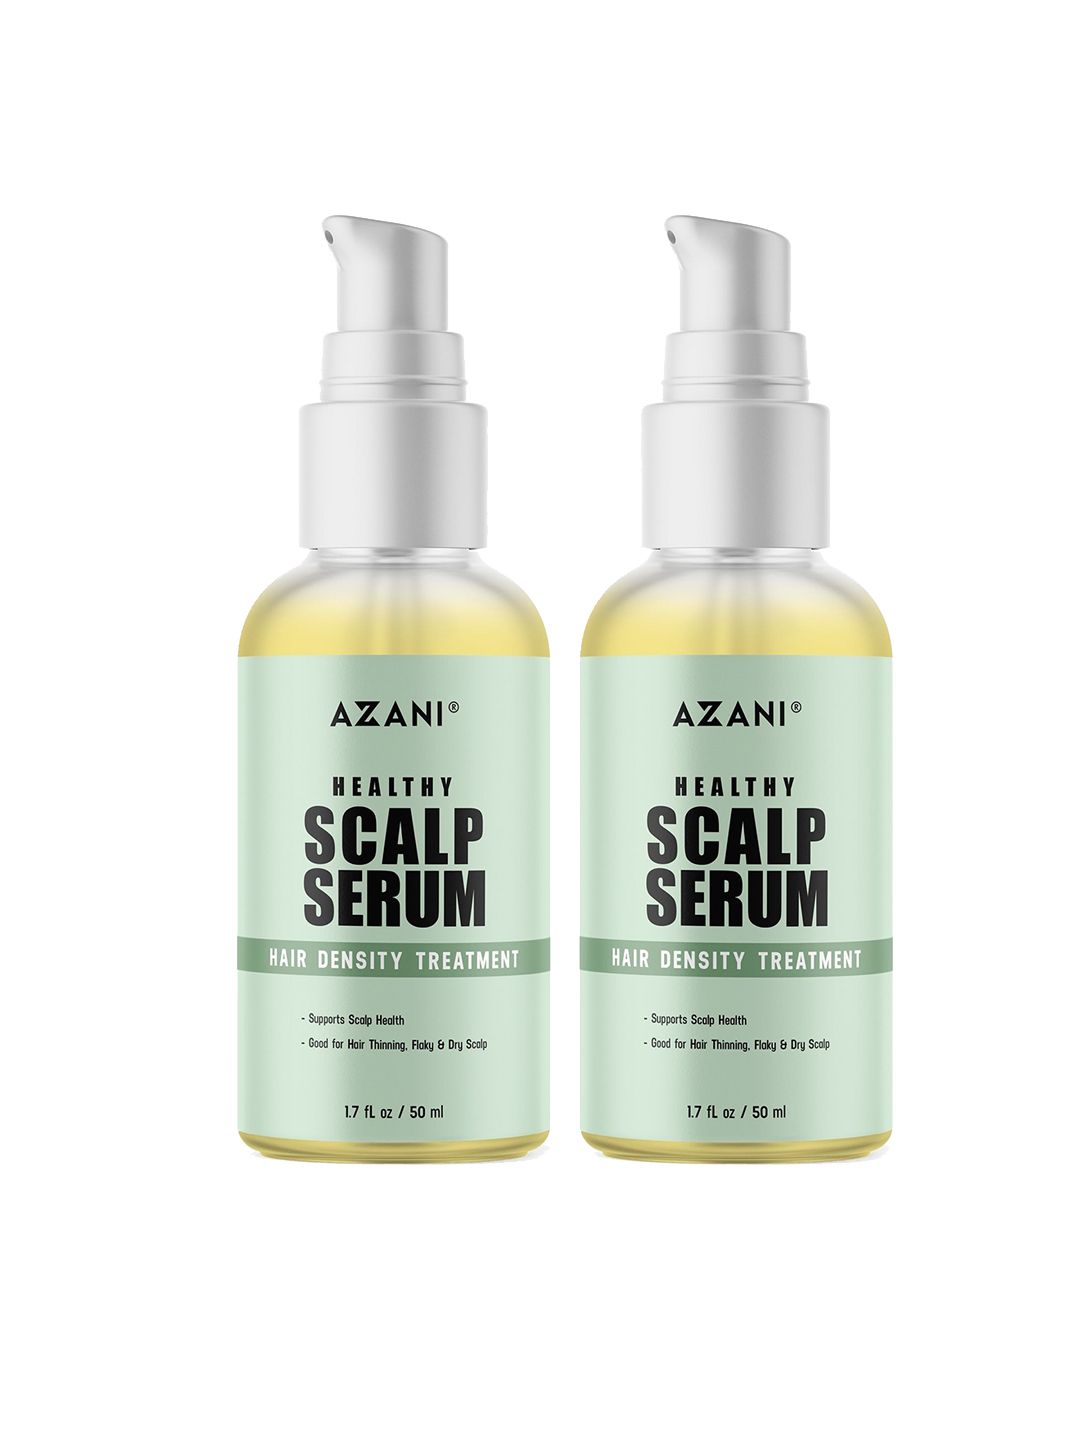 Azani Active Care Set of 2 Healthy Scalp Serums for Hair Density Treatment - 50 ml Each Price in India